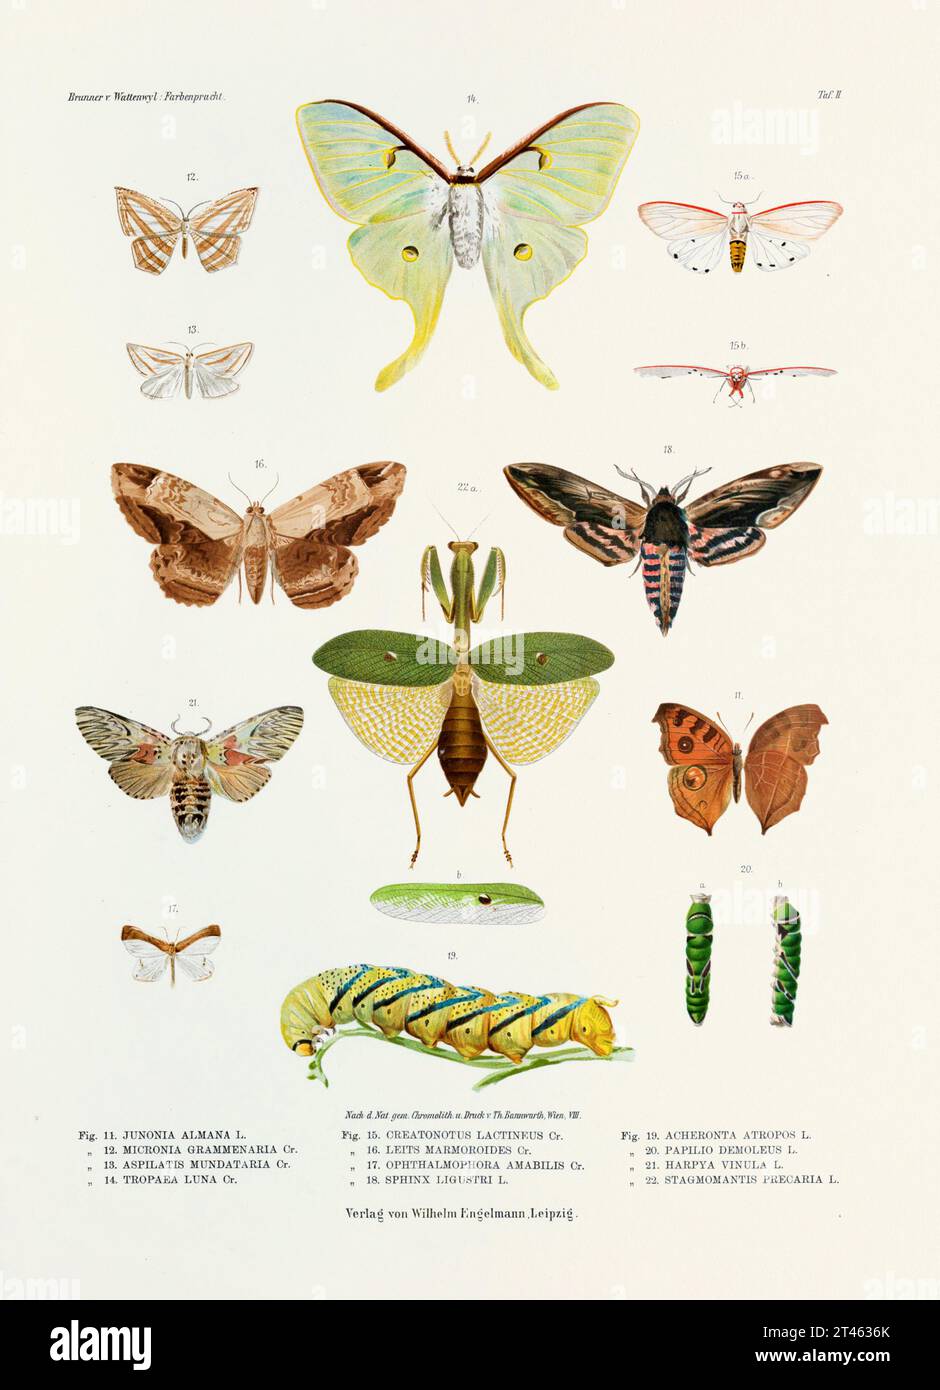 A vintage insect illustration from a 19th-century German book plate showcasing the coloration of various insect species. Butterflies, Locusts, caterpi Stock Photo